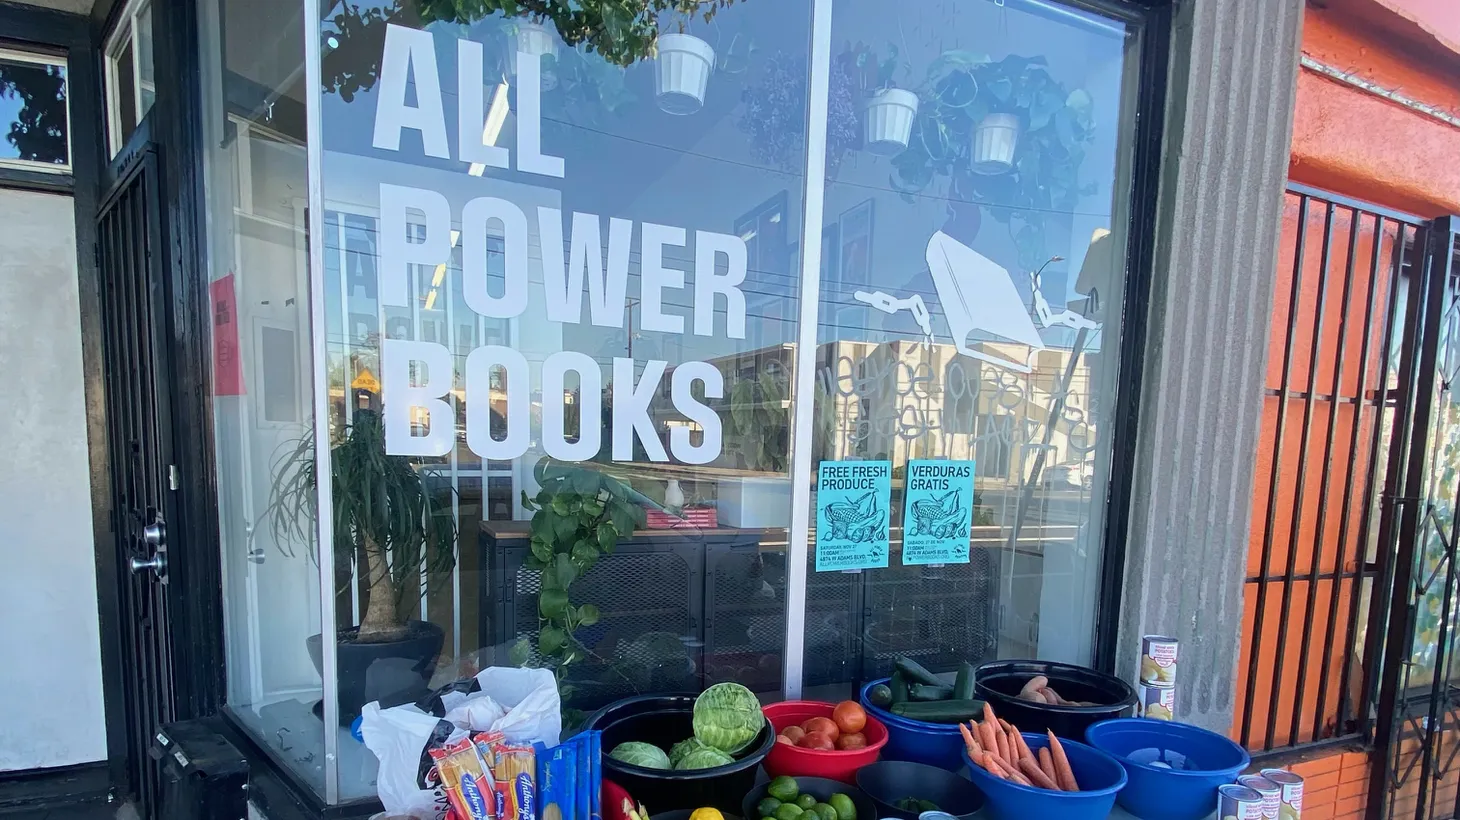 All Power Books offers the community more than just books — a community fridge is a big draw for neighbors.